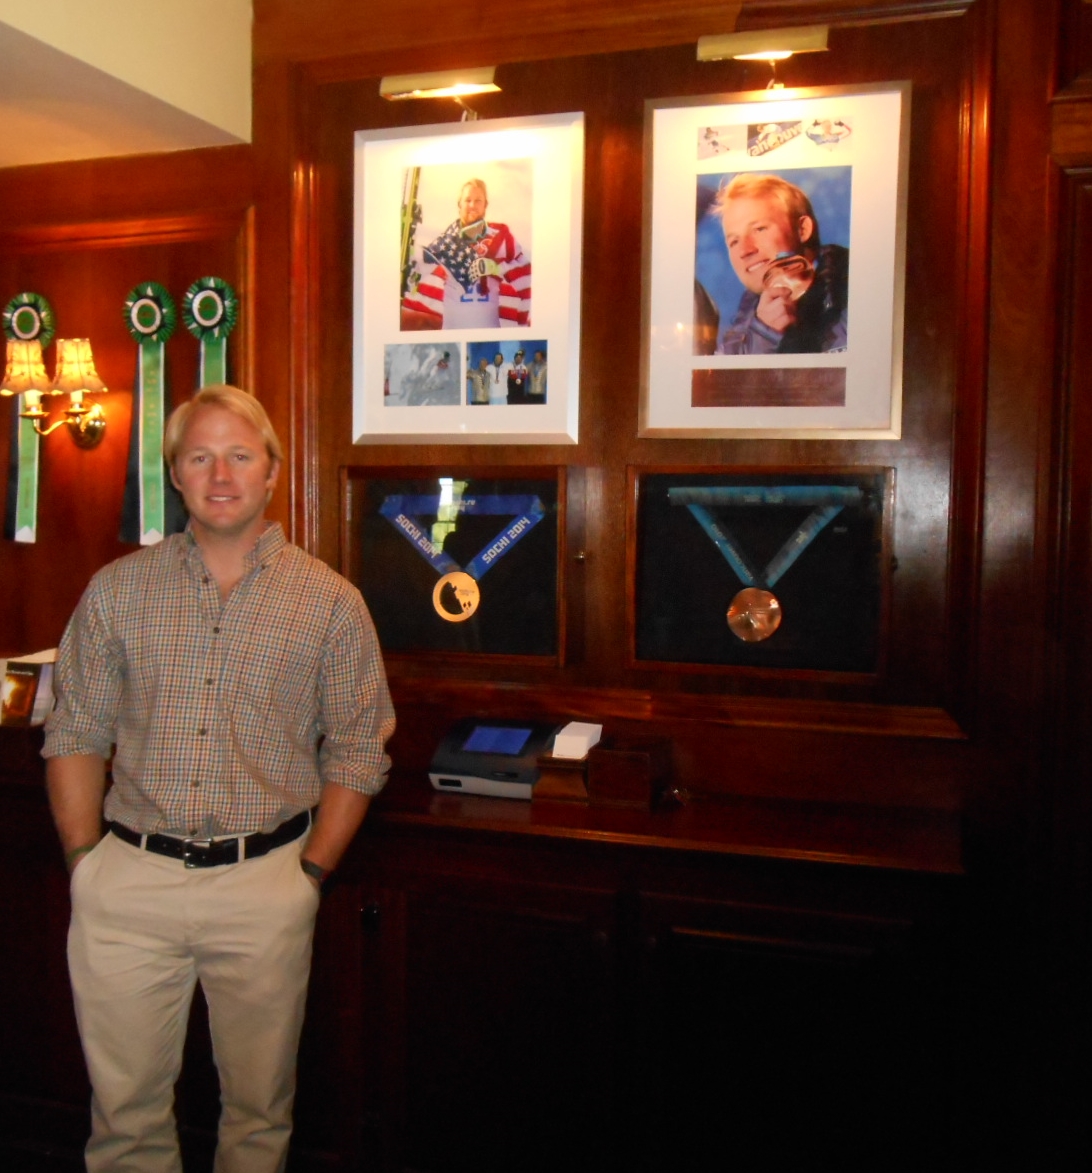 Andrew Weibrecht's Olympic ski medals greet guests at the hotel front desk